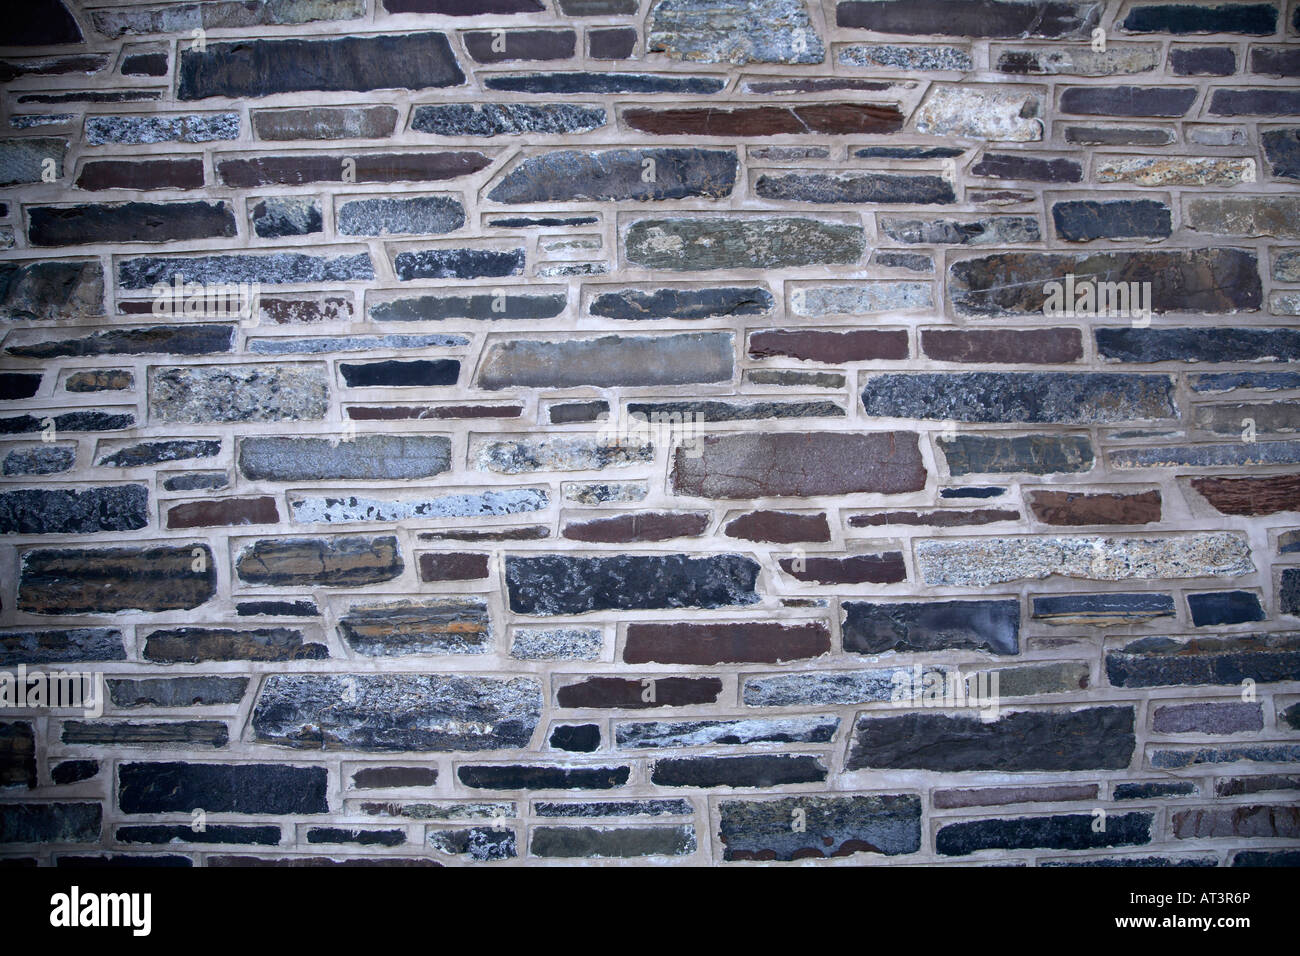 Varied stone wall.  Flat oblong stones in varing widths and materials with thick concrete around them. Stock Photo